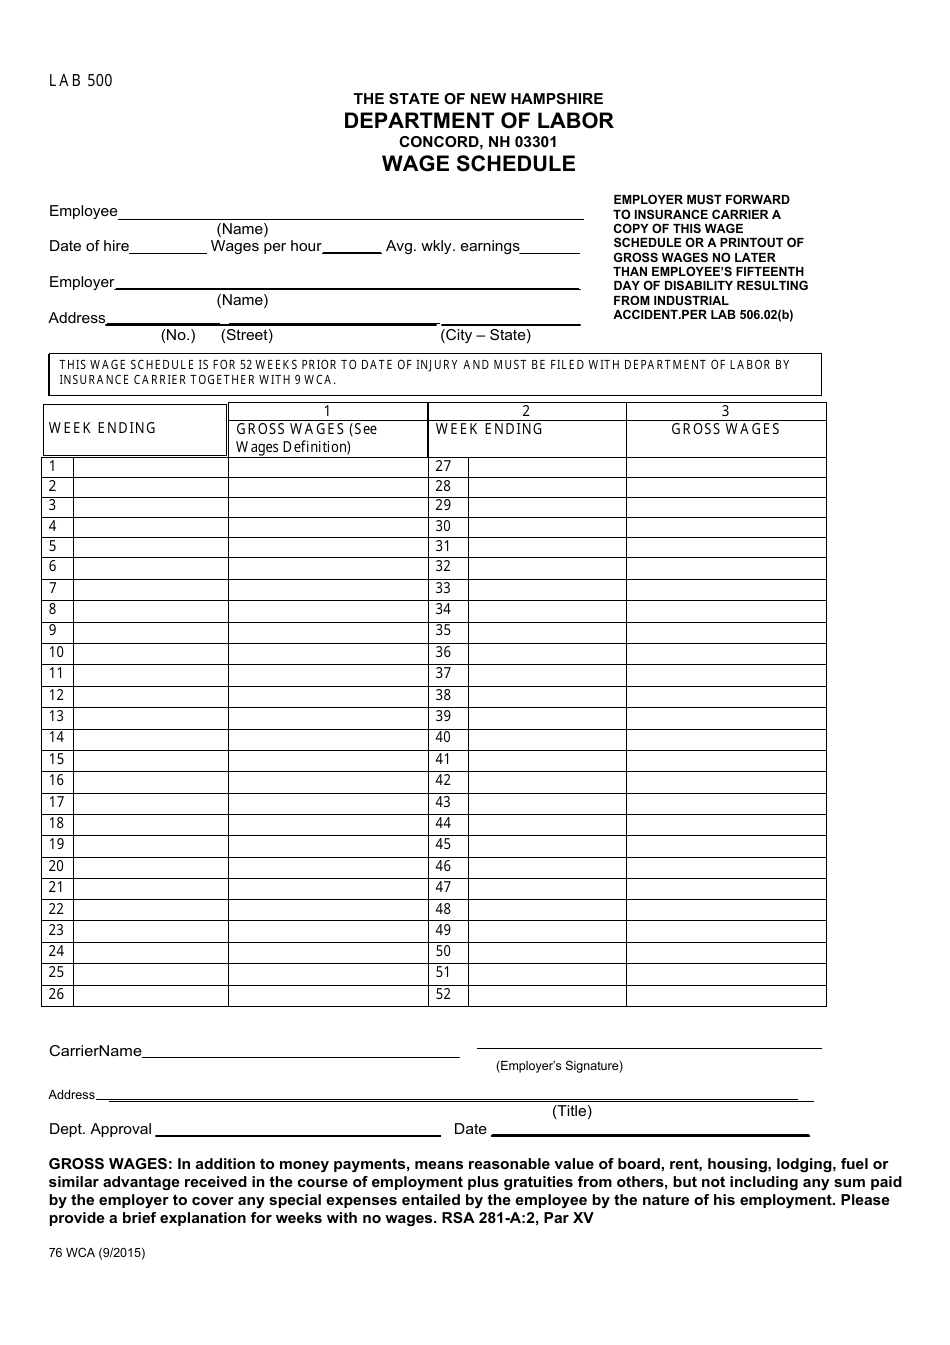 Form 76 WCA Wage Schedule - New Hampshire, Page 1